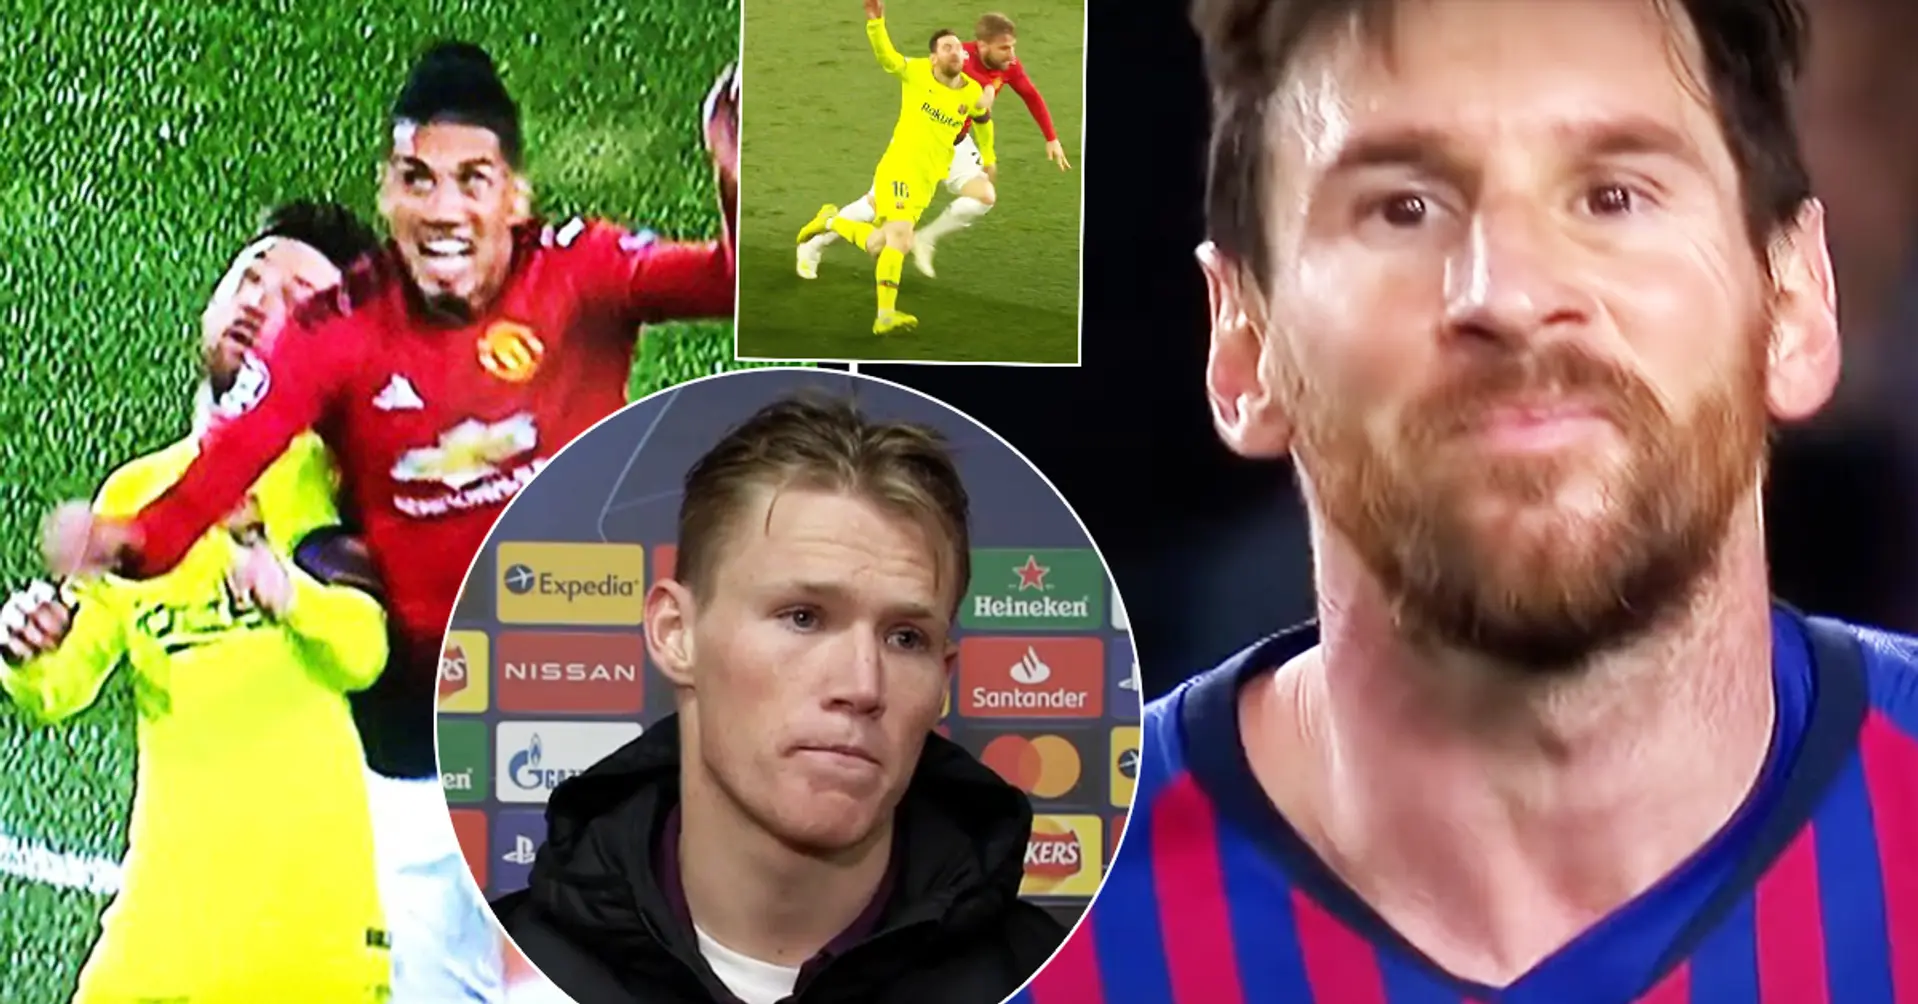 'No no, tell him it wasn't me!' McTominay reveals his awkward interaction with Leo Messi after asking for his shirt